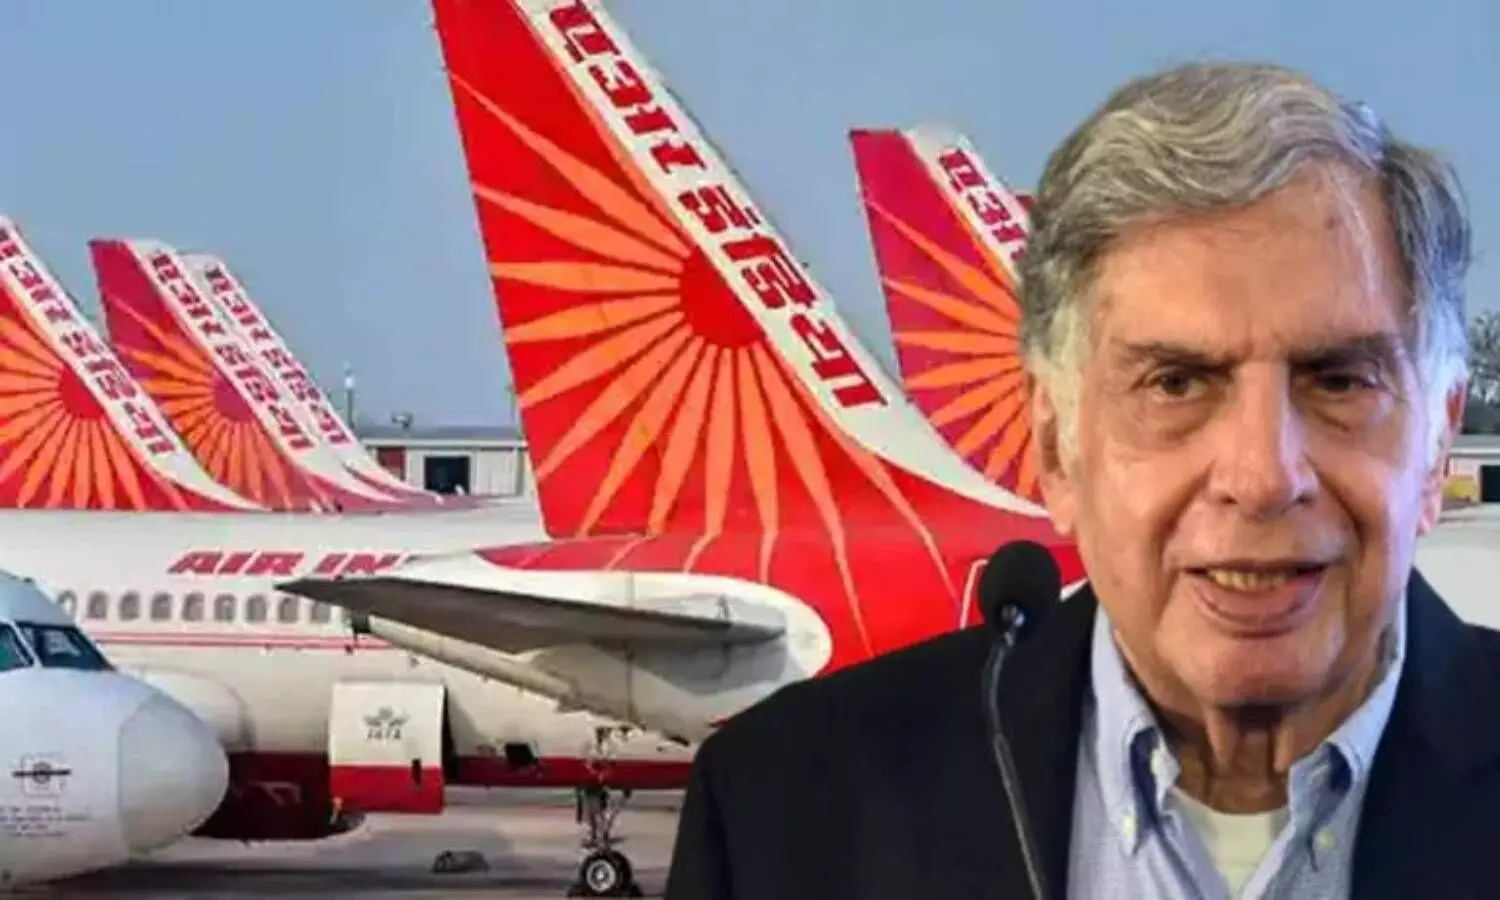 The Tata Group acquired Air India with a winning bid of Rs 18,000 cr: Here’s how